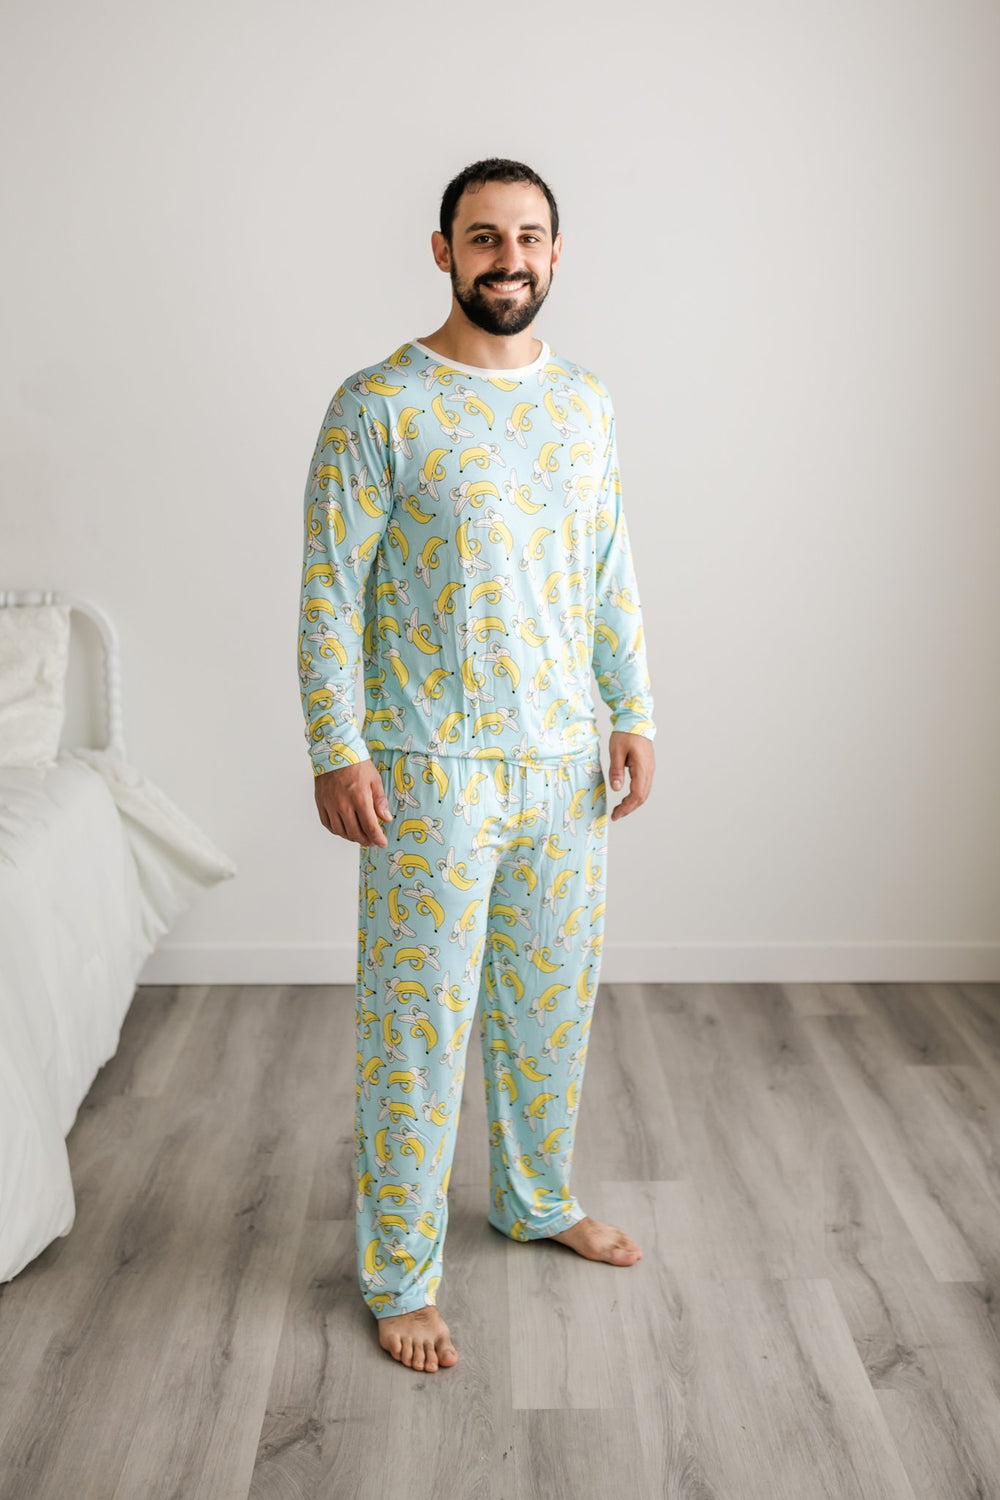 Male model wearing banana printed long sleeve pajama top with matching pajama pants. This print features a light blue background with pops of yellow coming from the bananas. The pajama top also features a white trim accent on the collar.